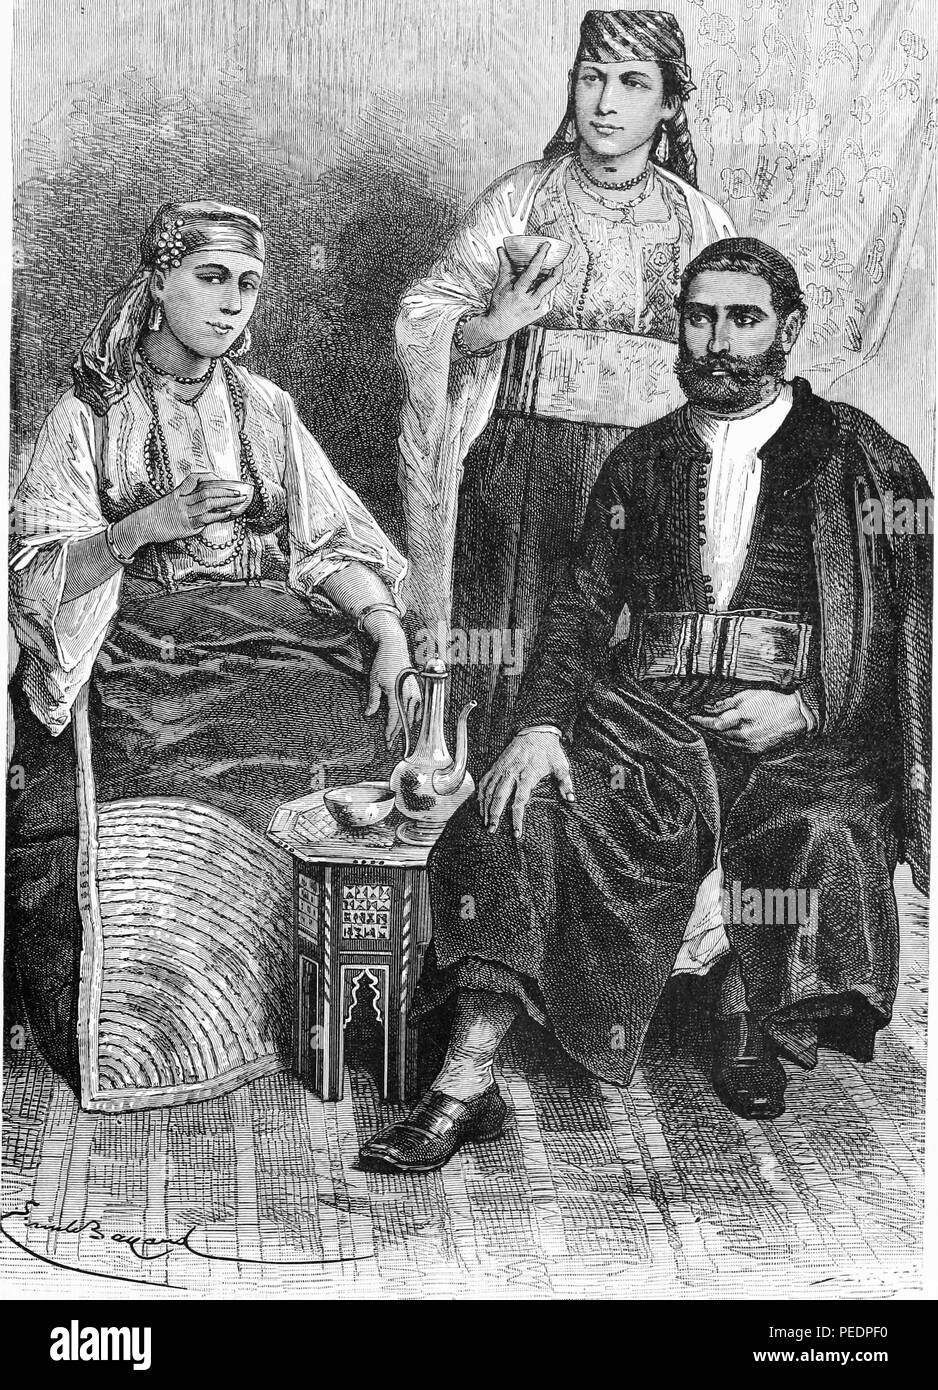 Black and white print depicting Jewish people, hailing from Tangiers, Morocco, the woman at left wears a long skirt with an ornately curved embroidered element rising from the hem, a long beaded necklace and a headscarf with a decorative pin at one side, the bearded man wears a wide belt over his long jacket or djellaba, and a yarmulke on his head, the woman standing in the background also wears a head covering and 19th century Tunisian dress with a wide belt, drawn by Emile Bayard from an original photograph, and published in John Clark Ridpath's volume 'Ridpath's Universal history', 1897. Co Stock Photo